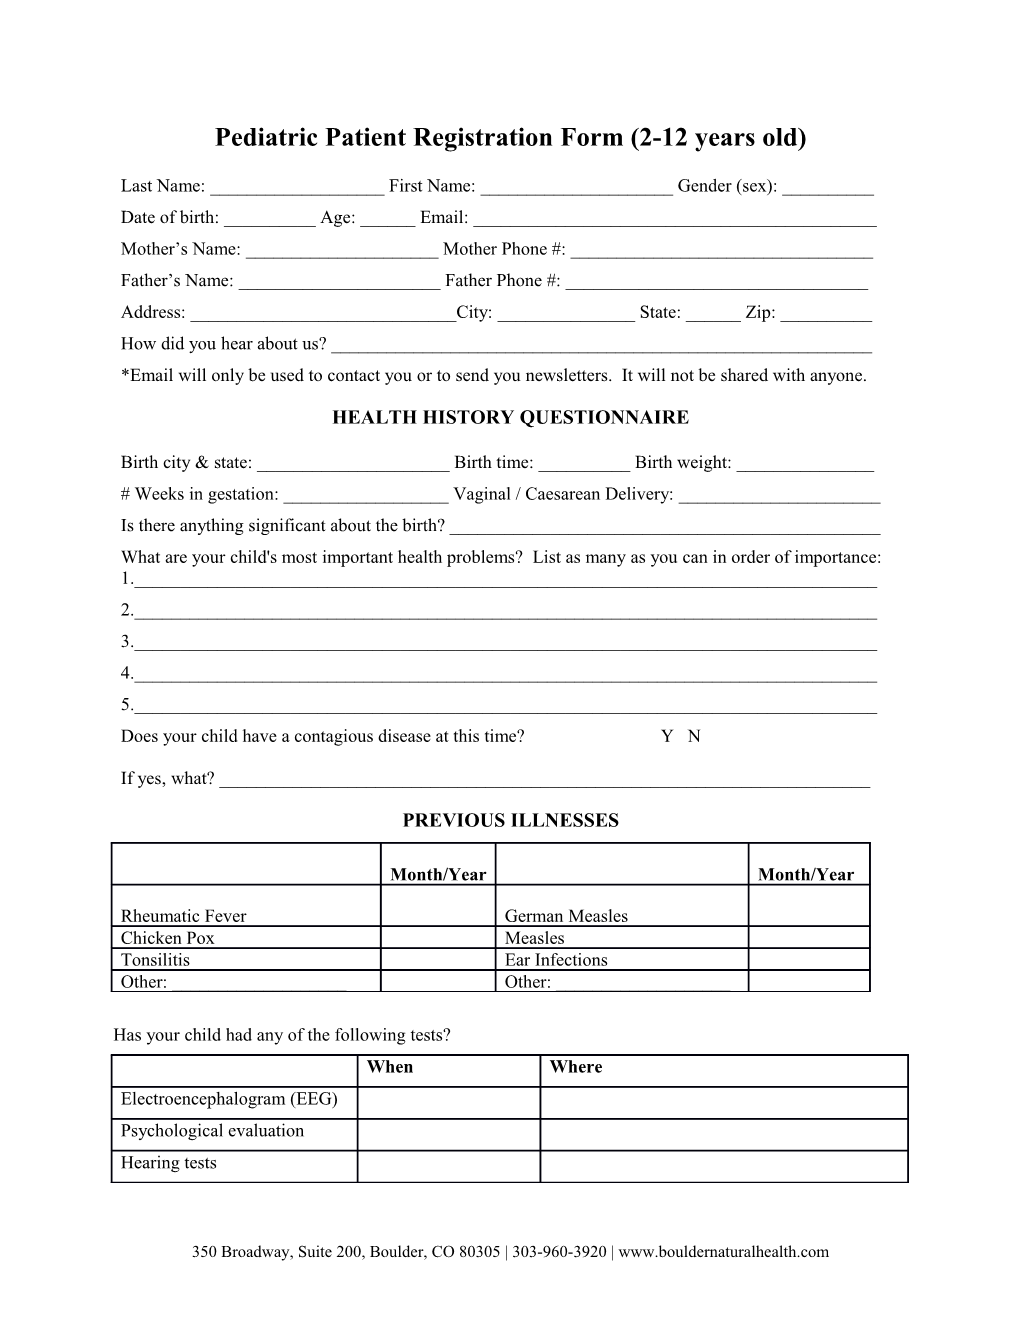 Pediatric Patient Registration Form (2-12 Years Old)